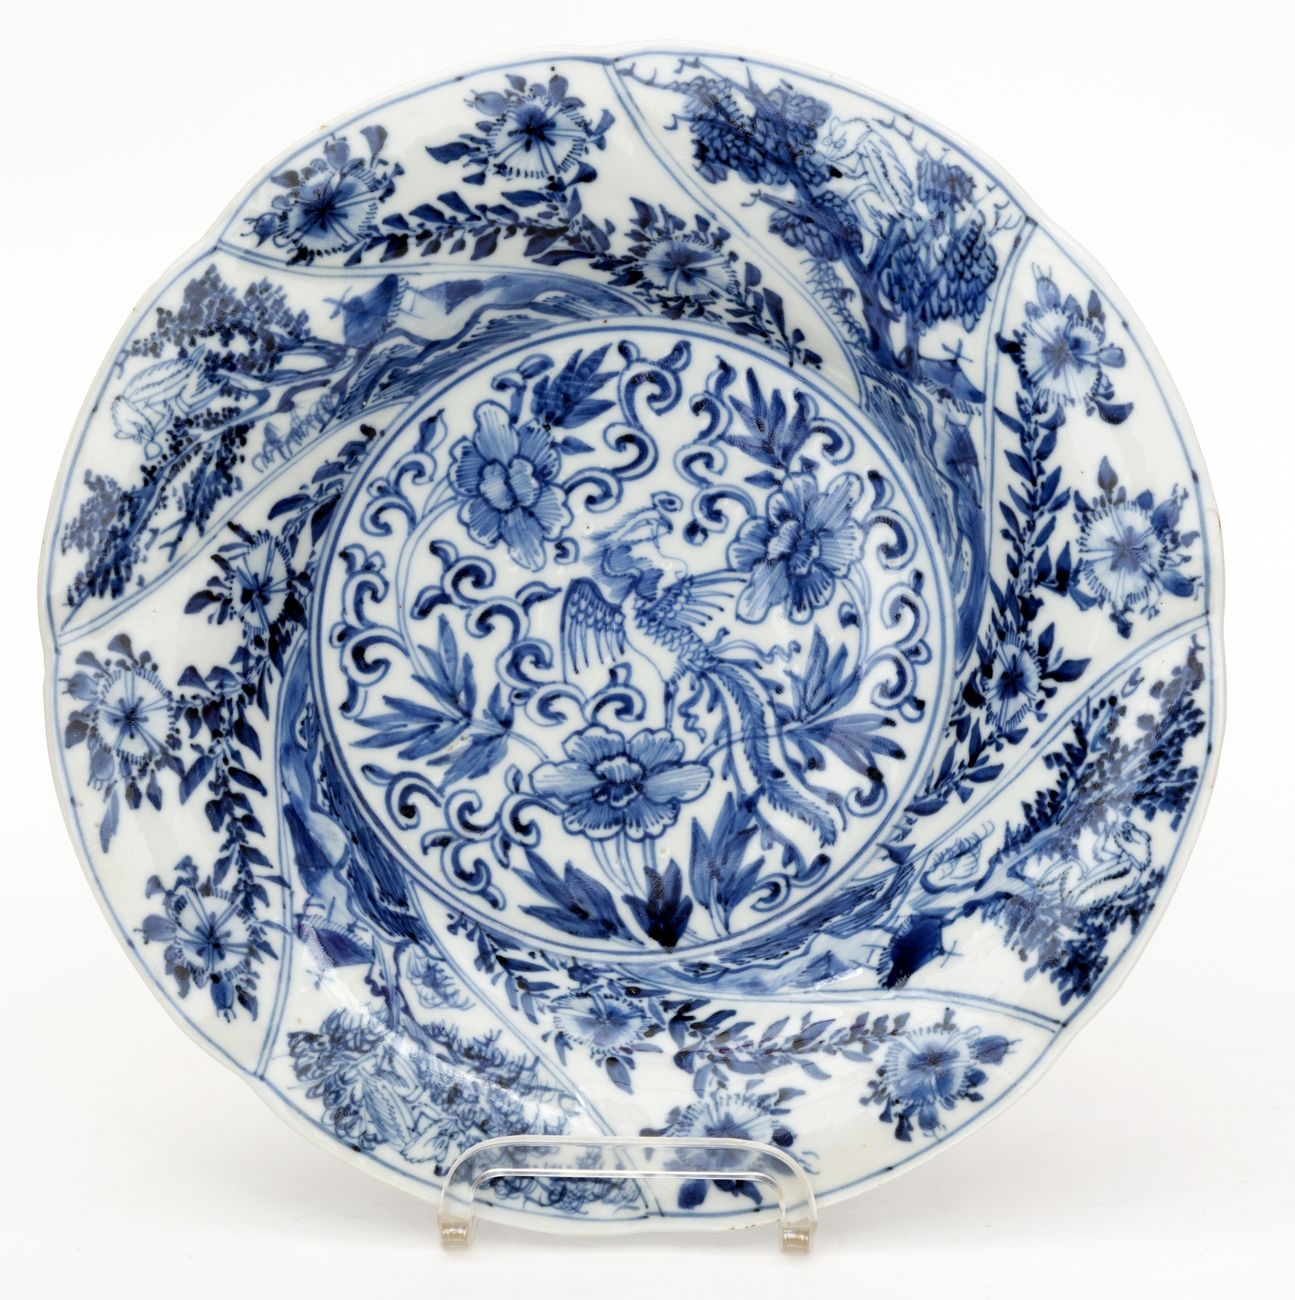 Null China, Kangxi period (1662-1722)
Porcelain bowl decorated in blue-white ena&hellip;